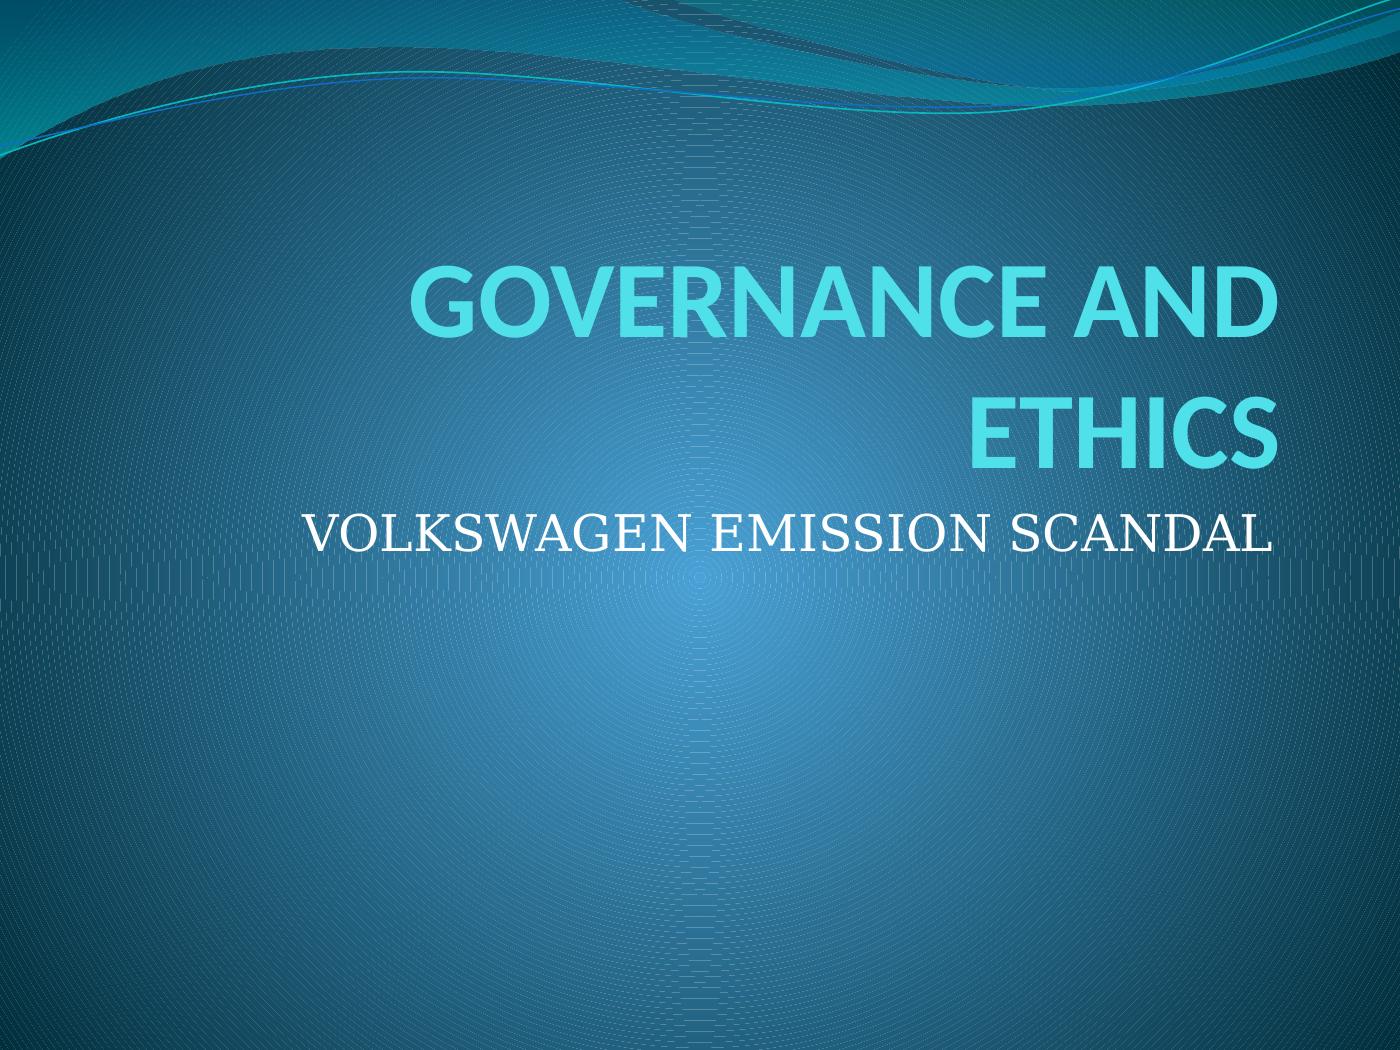 Goverance  And Ethics Volkswagen_1